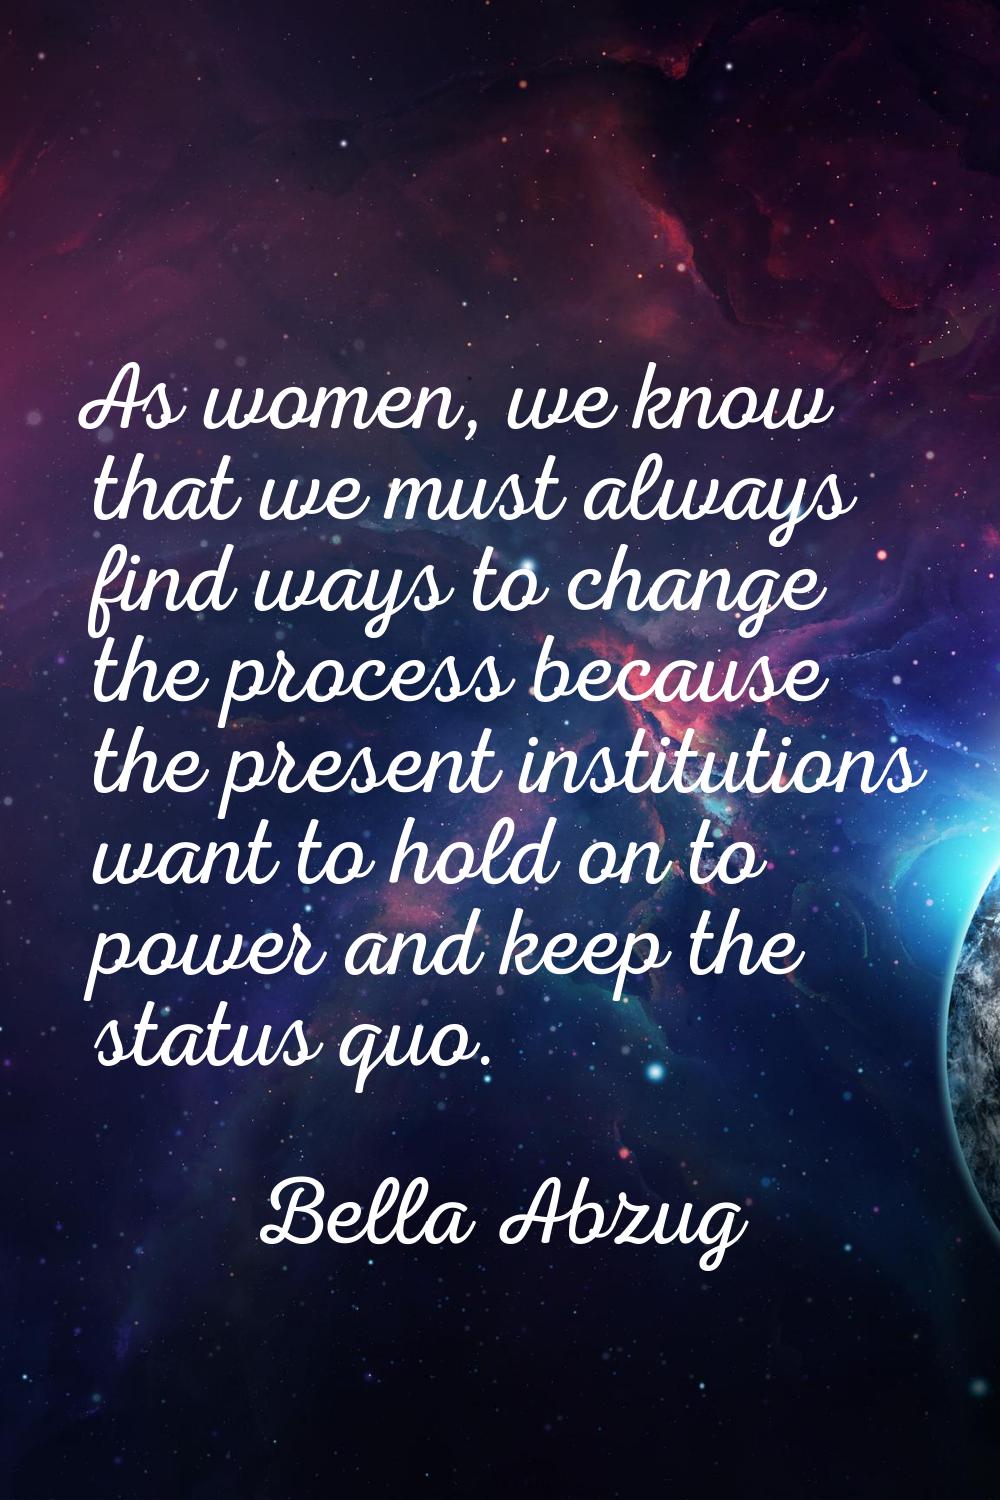 As women, we know that we must always find ways to change the process because the present instituti